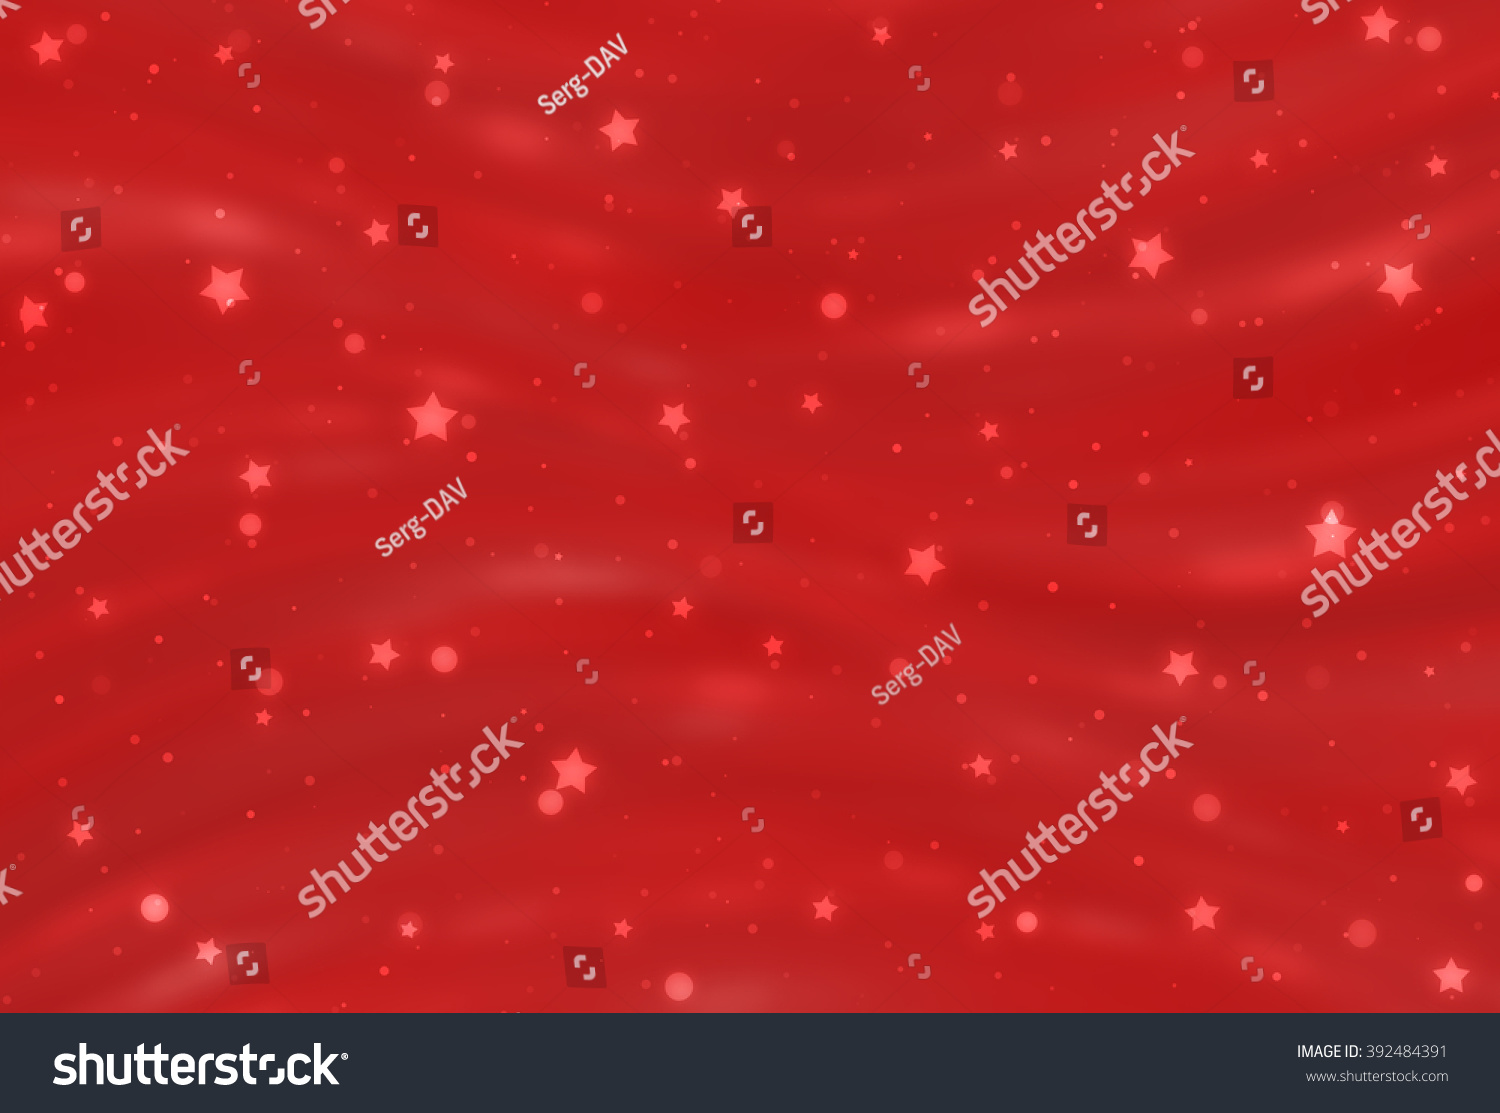 Abstract Red Elegant Background With Glitter And Waves Stock Photo ...